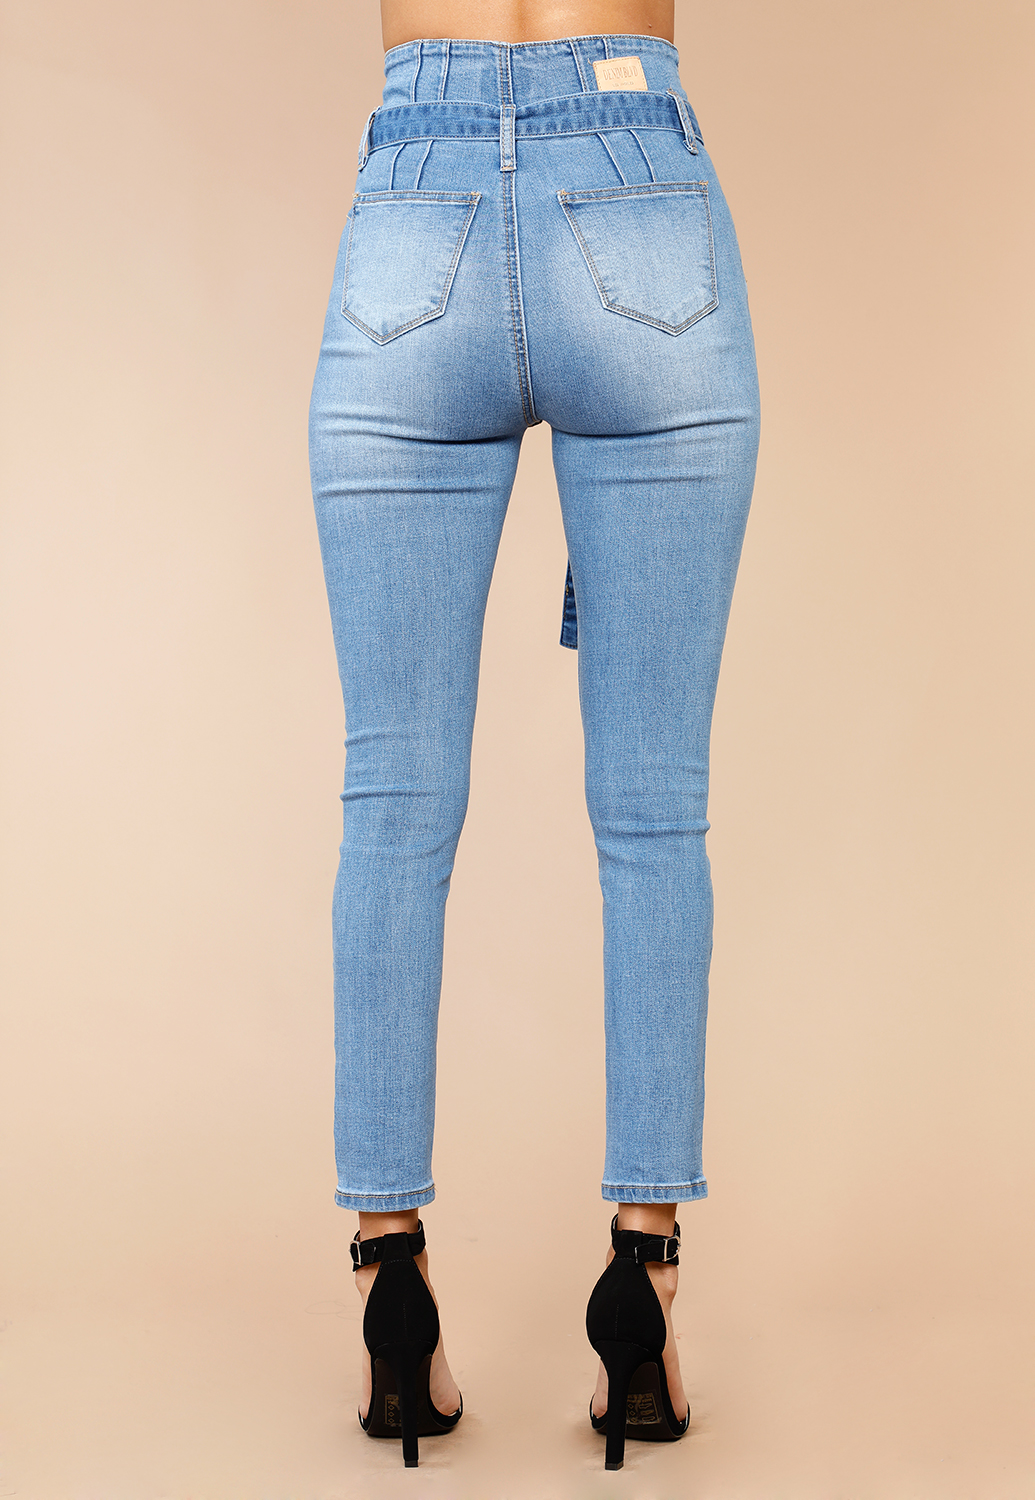 High Waisted With Belt Skinny Jeans | Shop High Waisted at Papaya Clothing